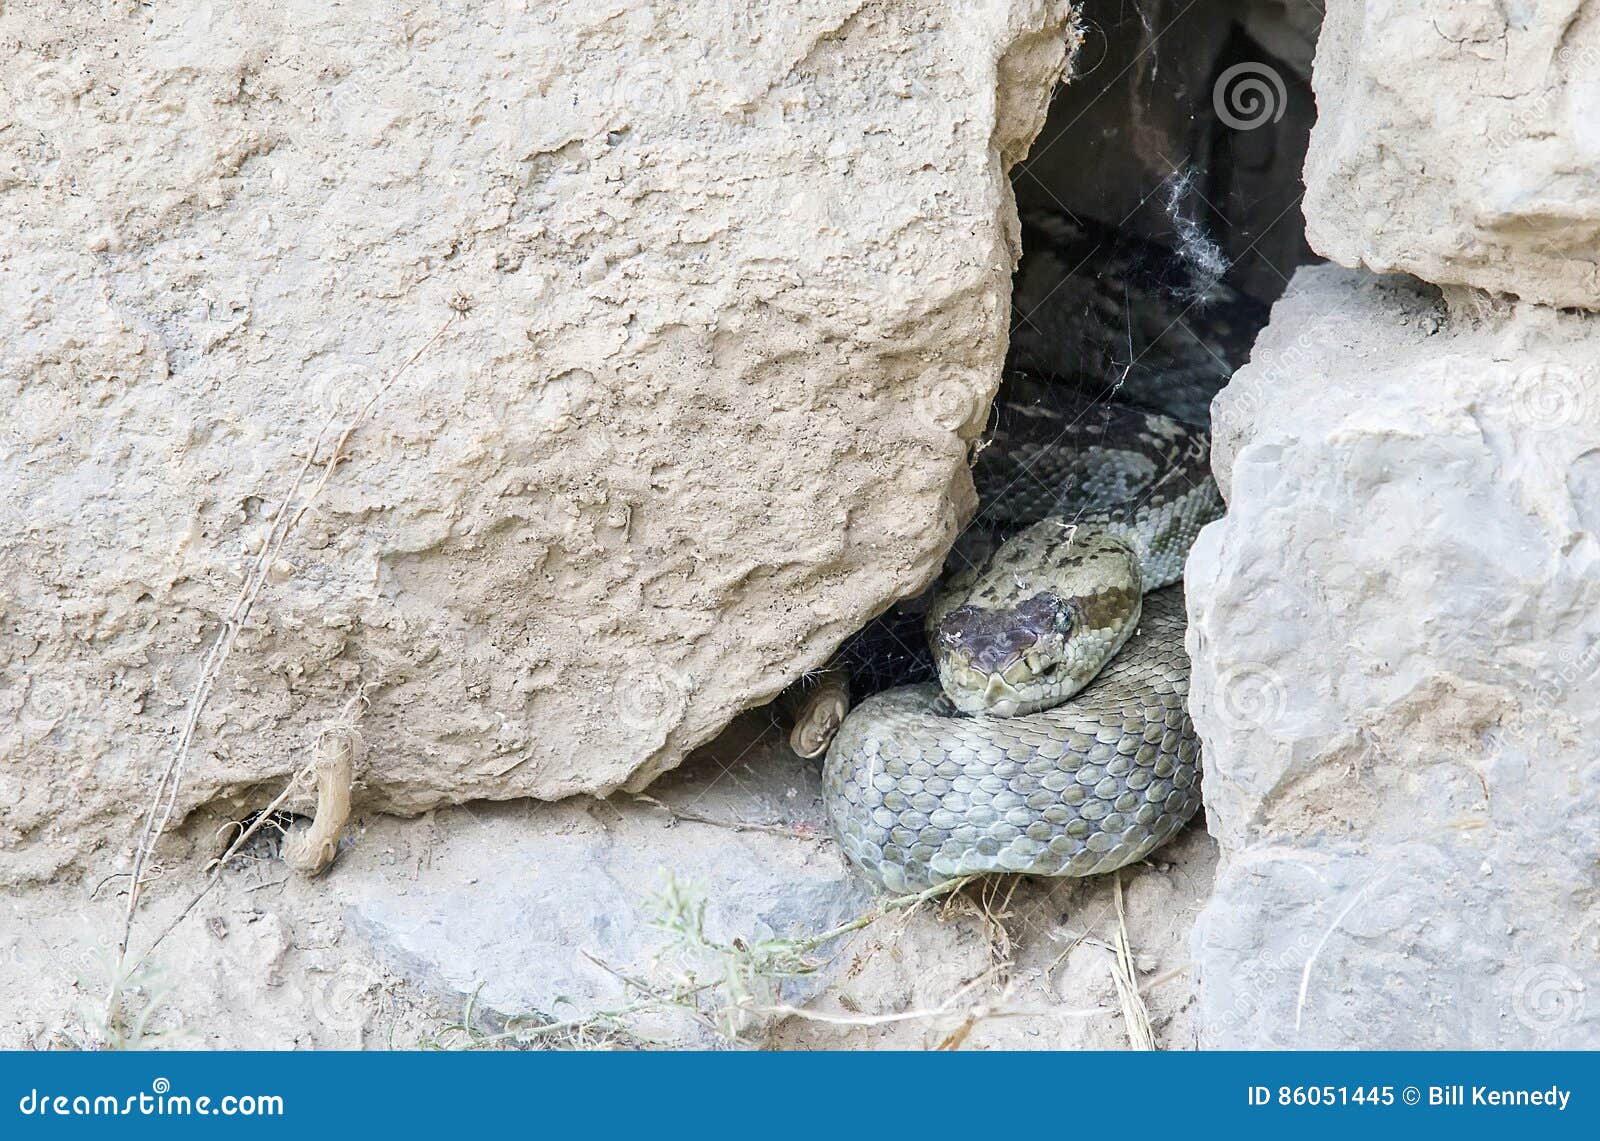 black-tailed rattlesnake crotalus molossus hidden in a rock cr